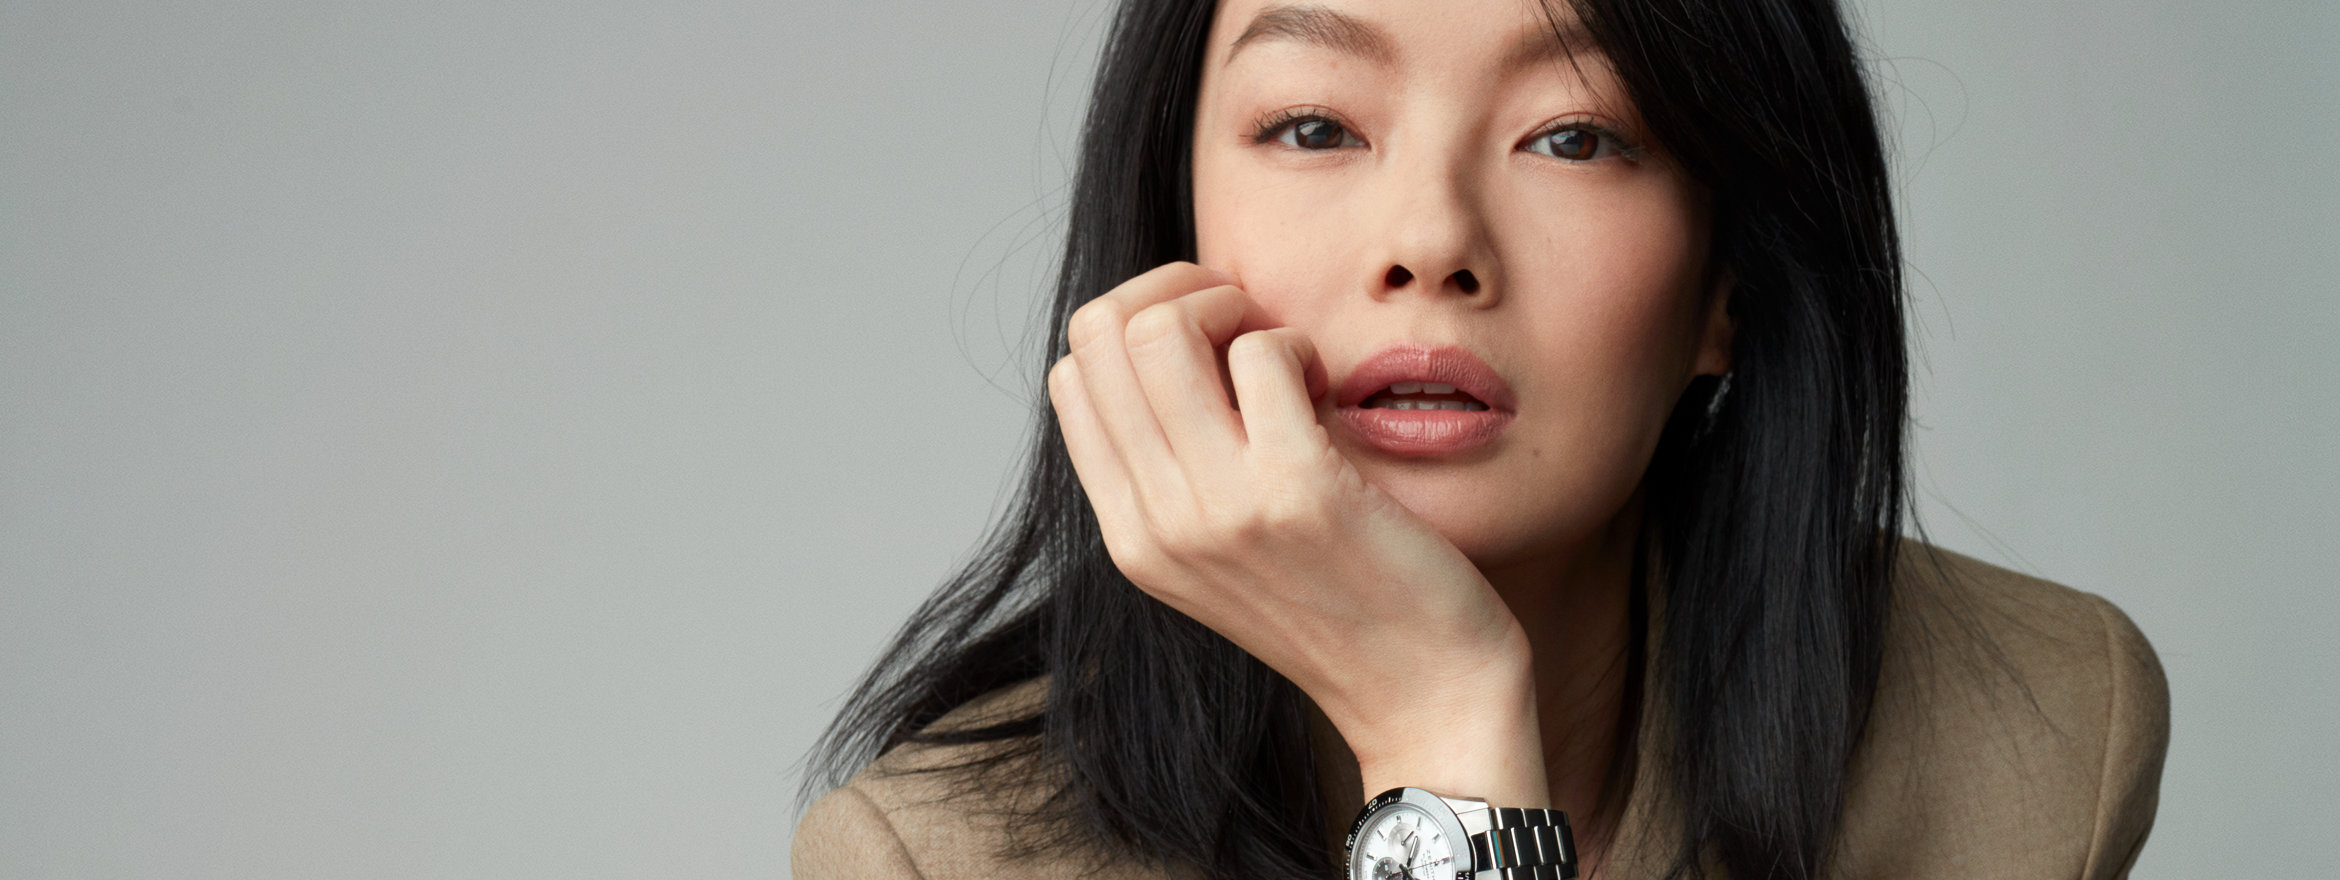 Zenith Welcomes Singapore’s Sheila Sim as Friend of the Brand